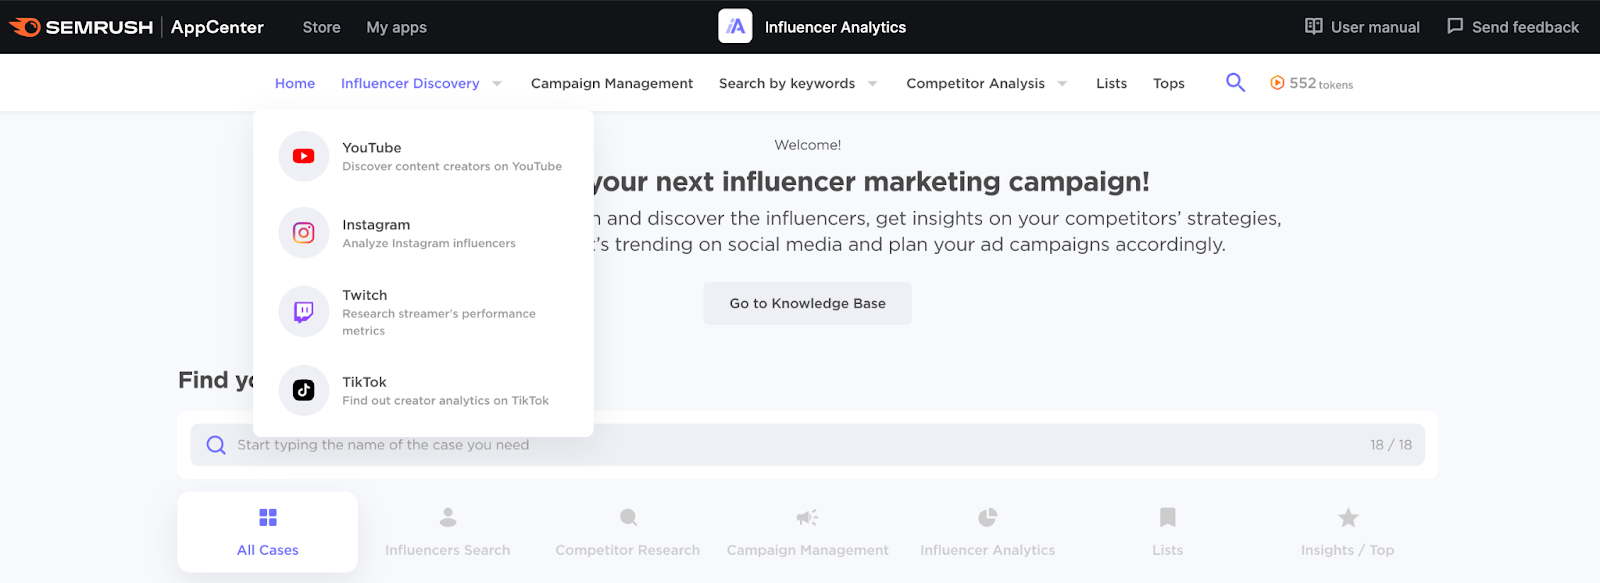 Influencers Discovery tab in the app